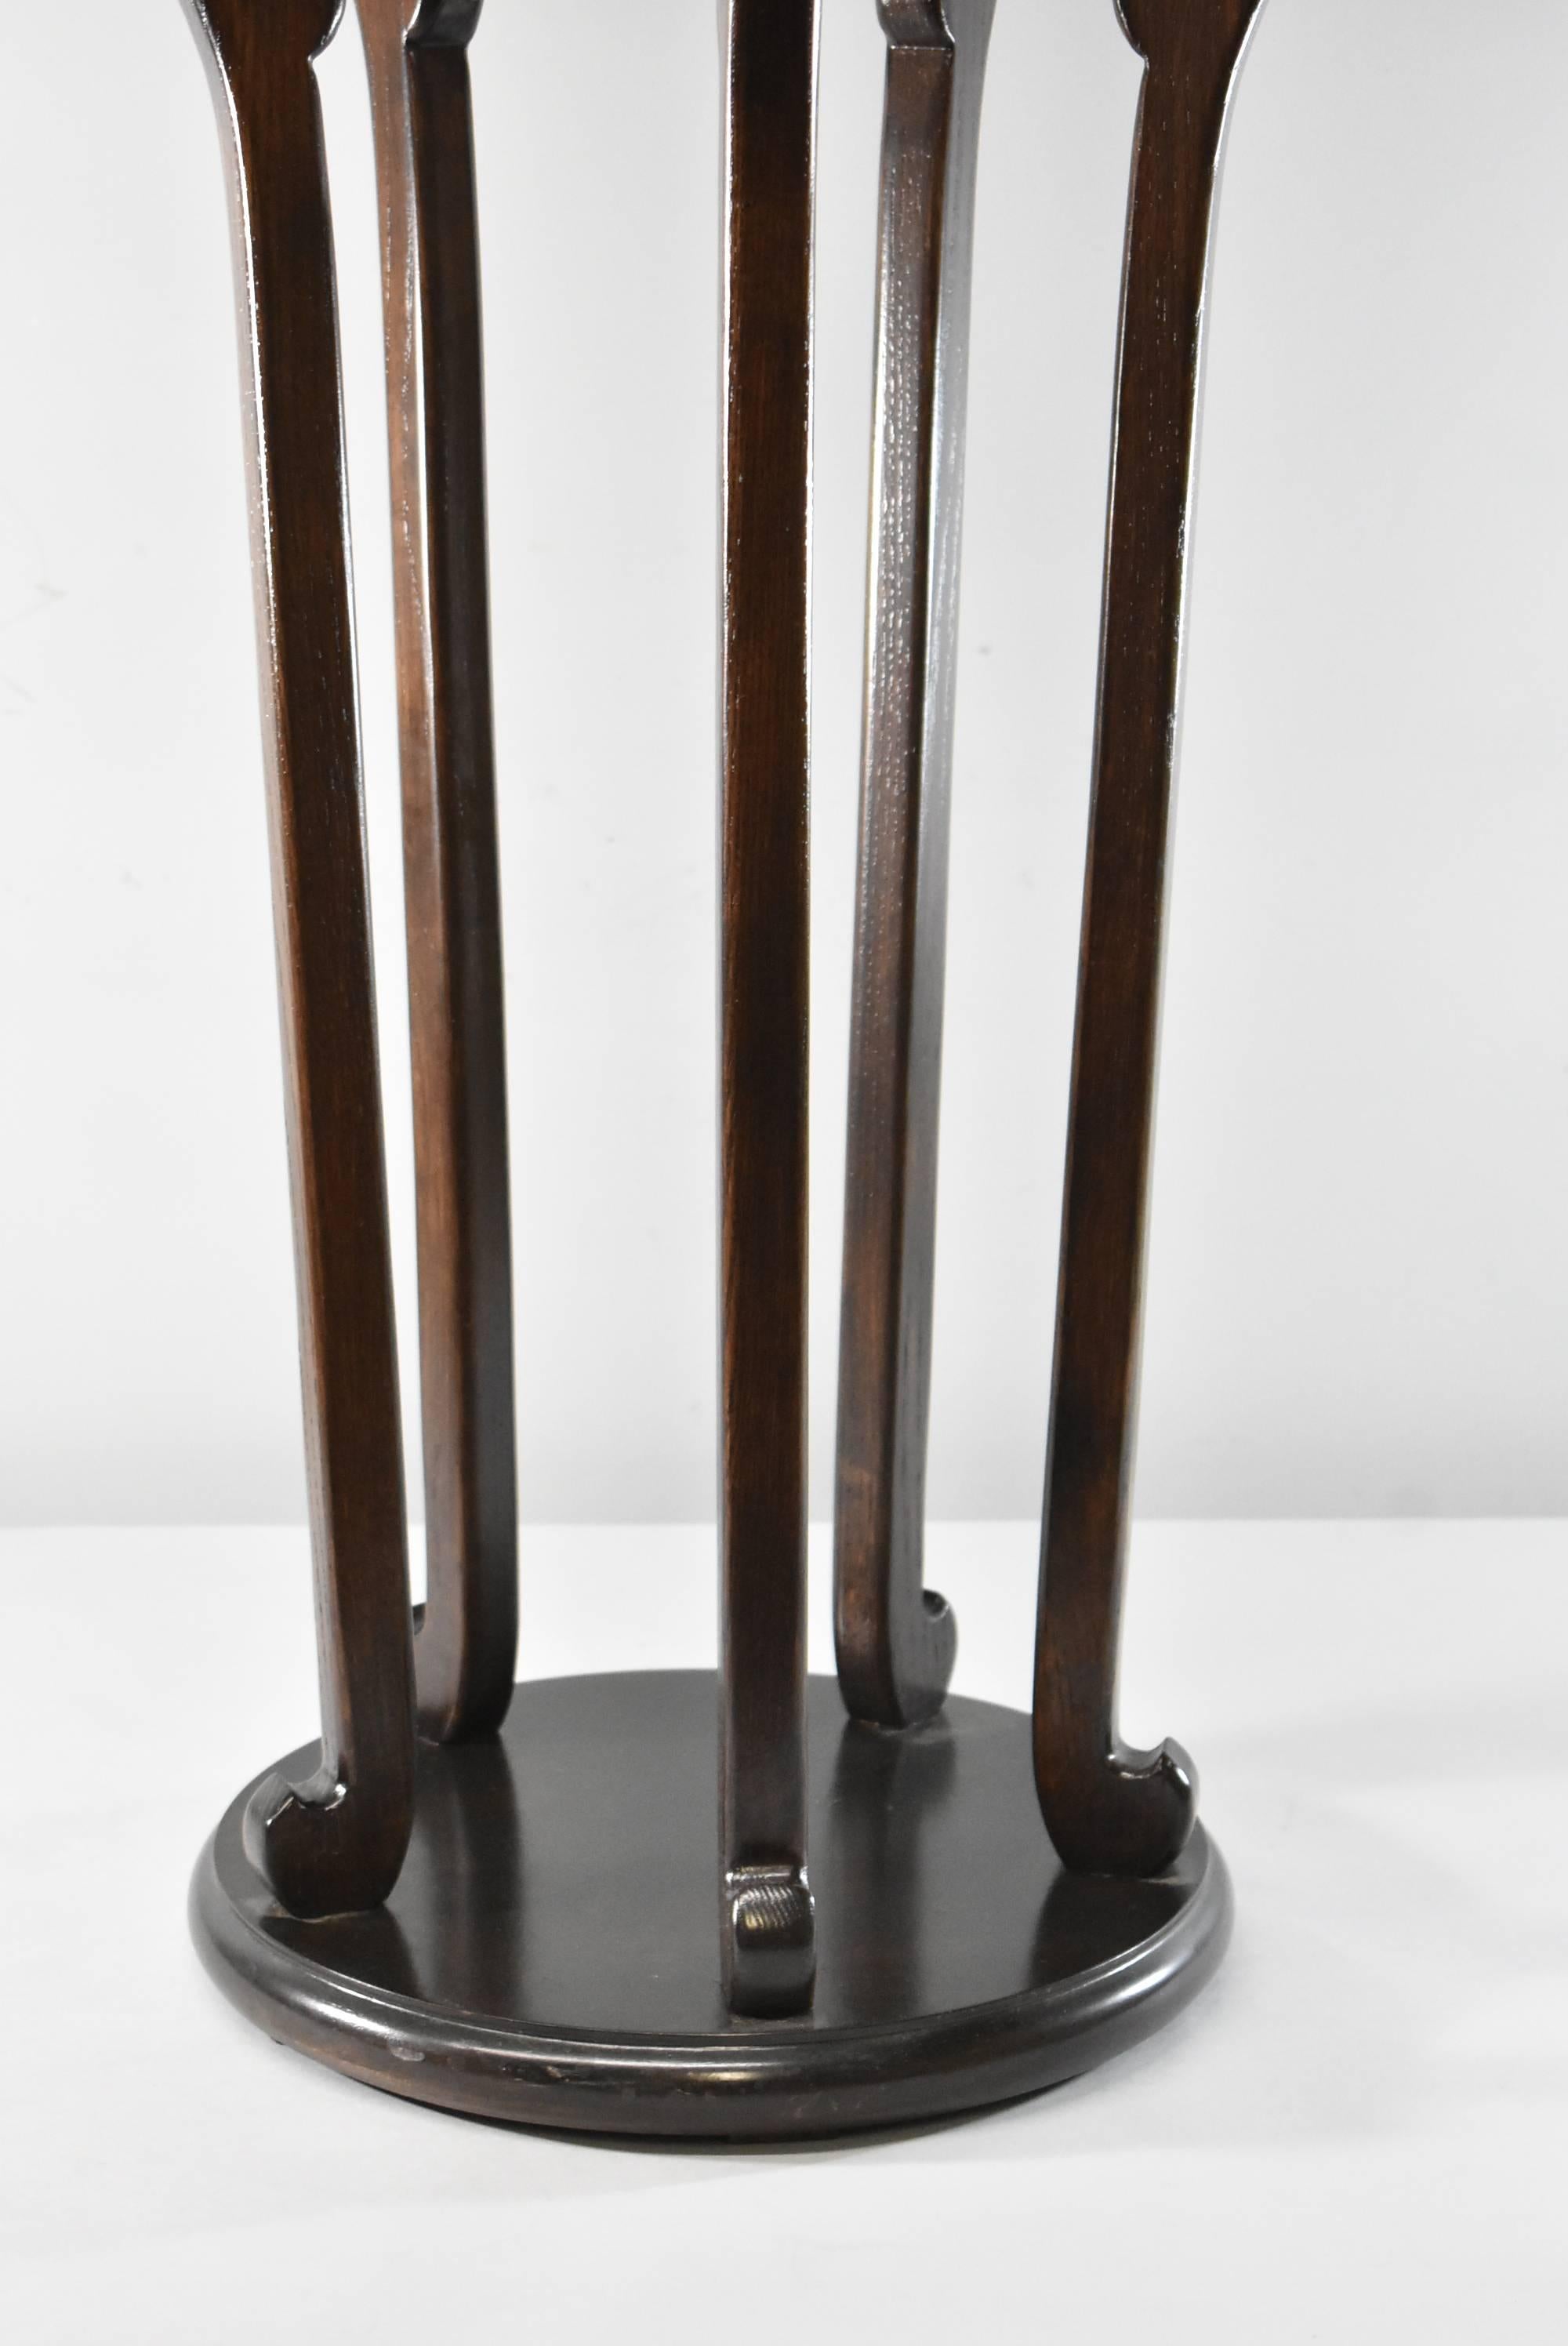 American Pair of Asian Burl Plant Stands Designed by Michael Taylor for Baker Furniture